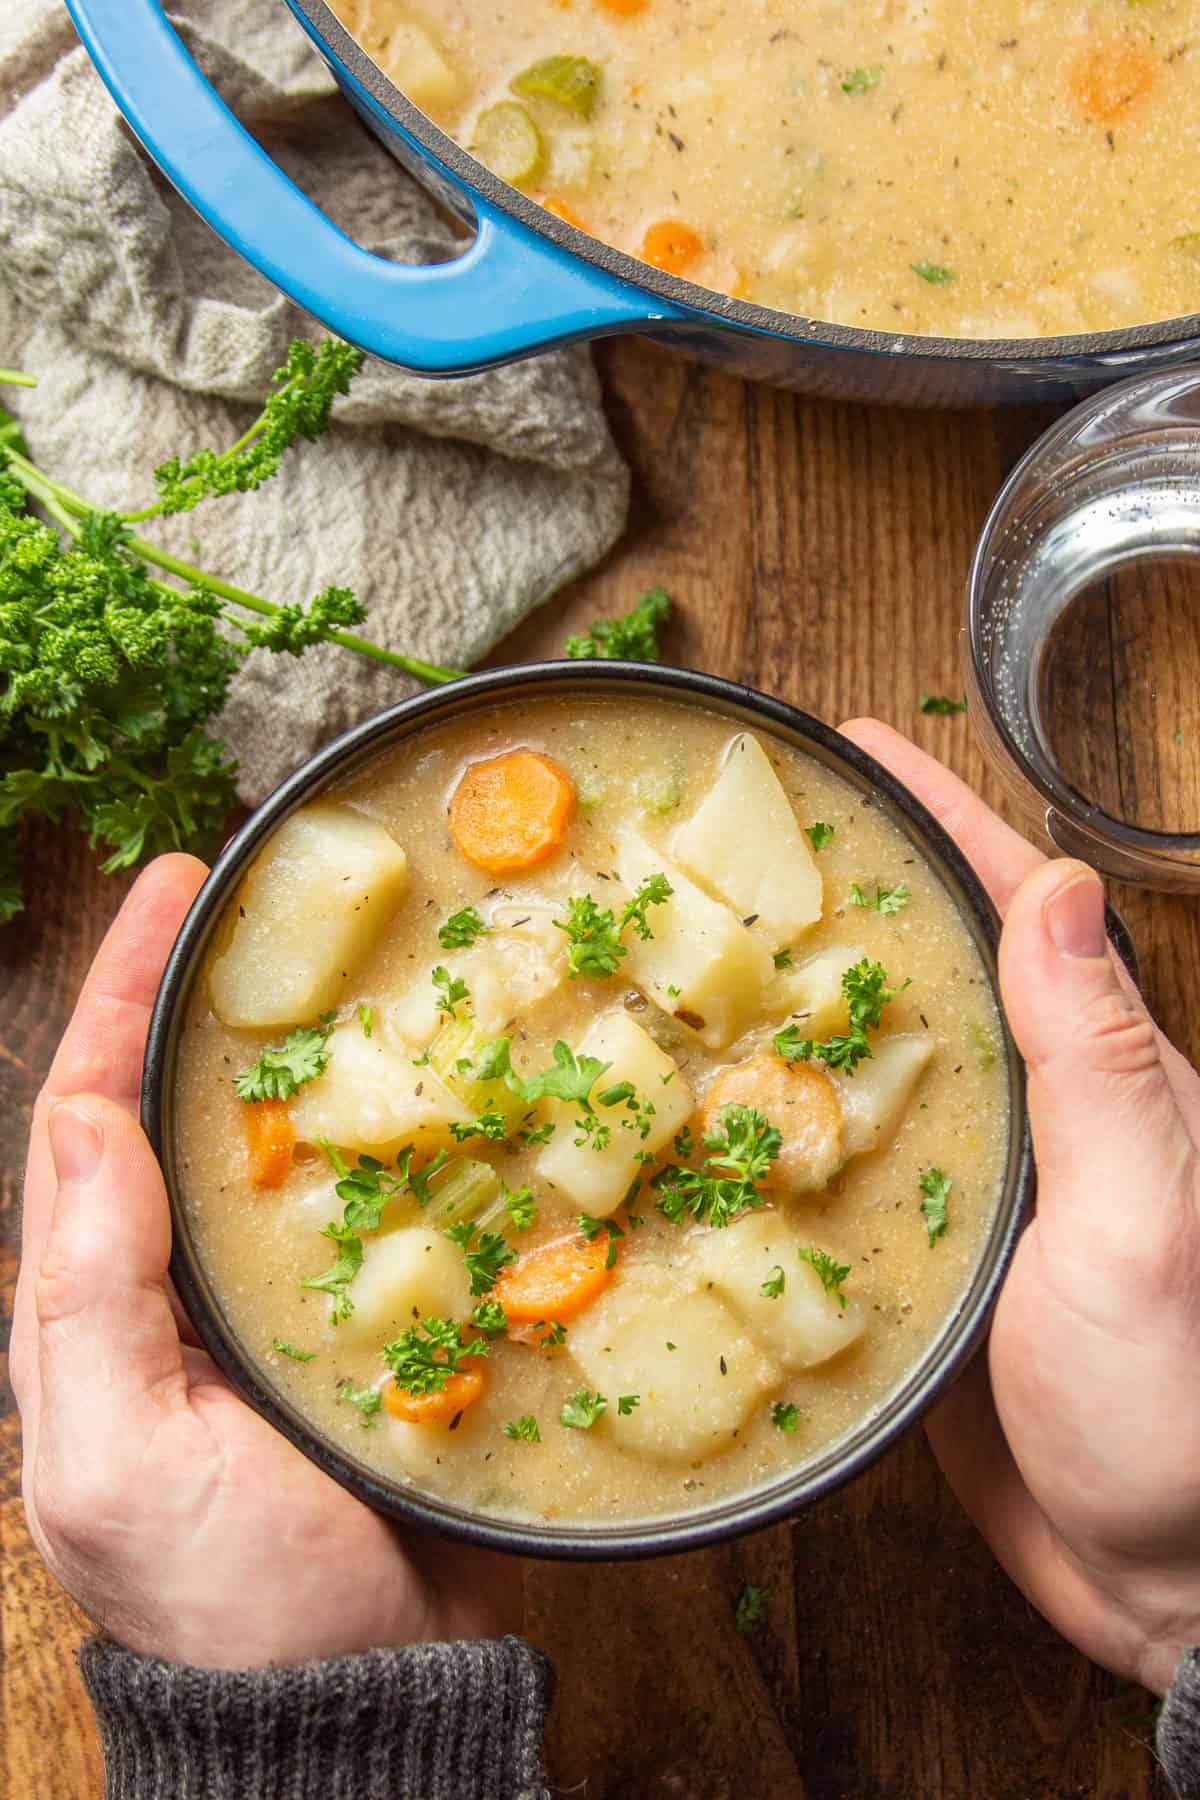 Pair of hands holding a bowl of Vegan Potato Soup over a wooden table.